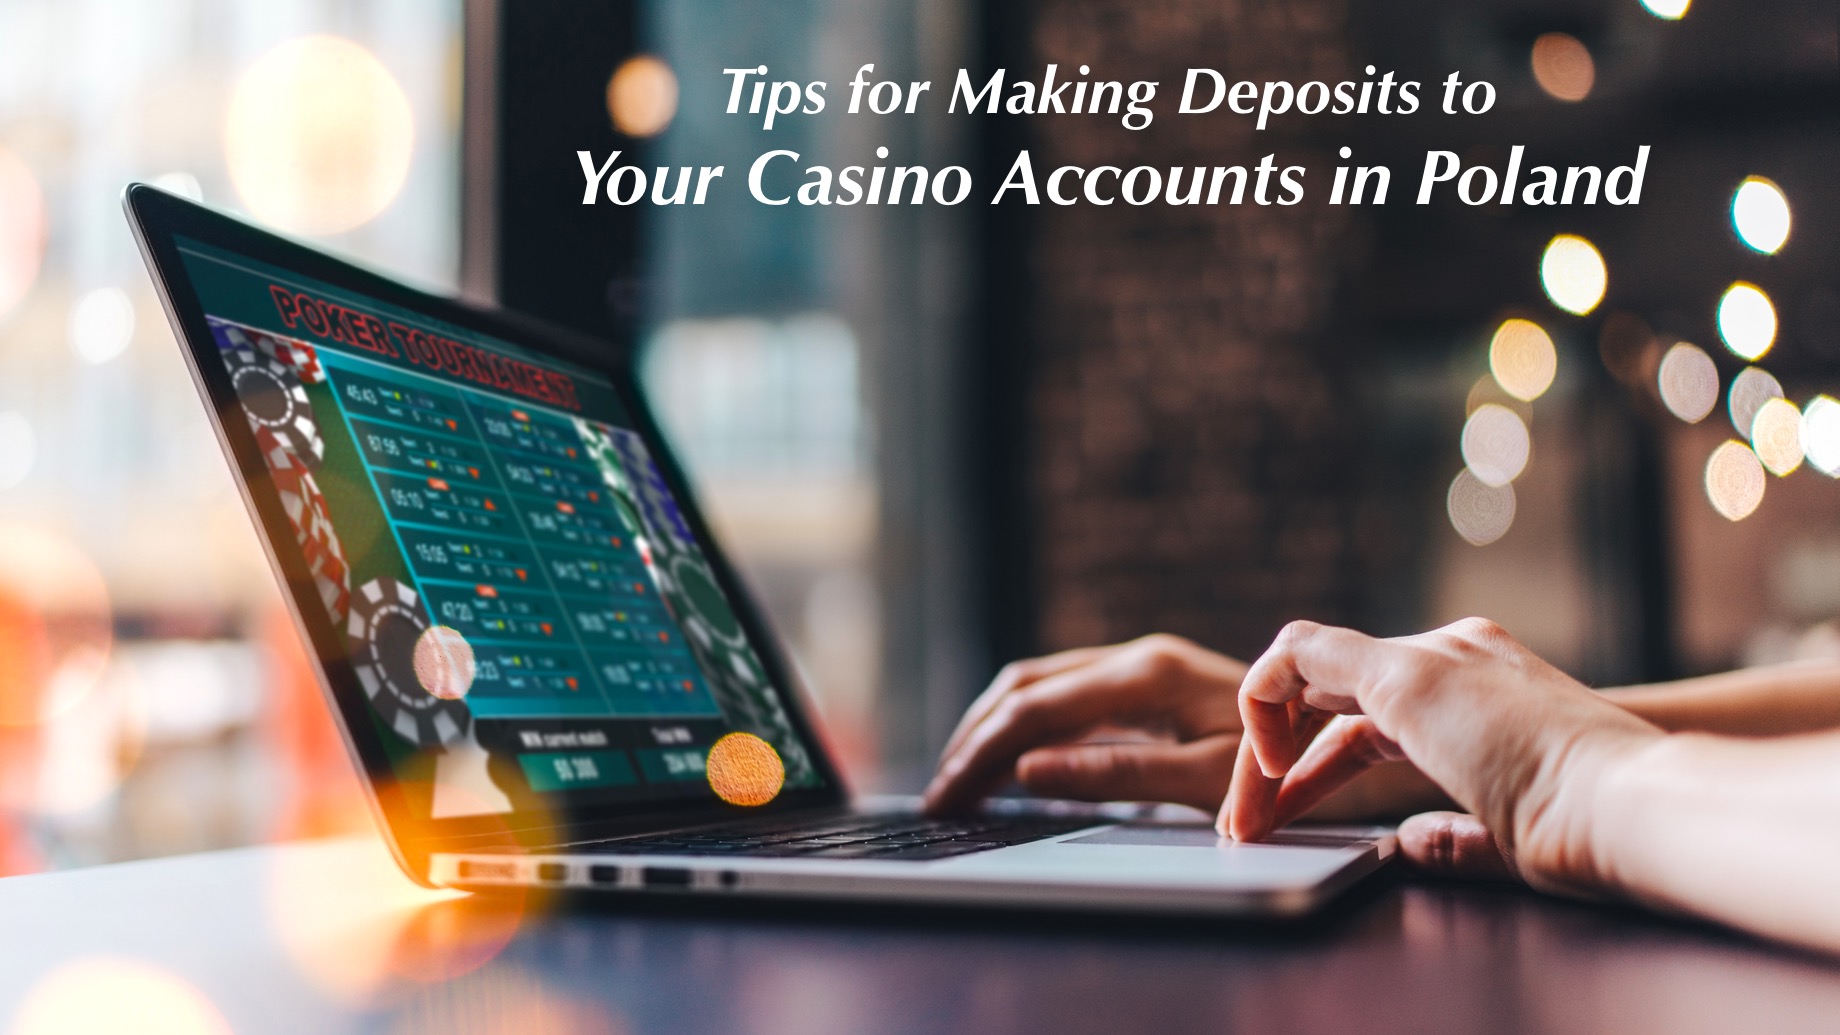 Tips for Making Deposits to Your Casino Accounts in Poland